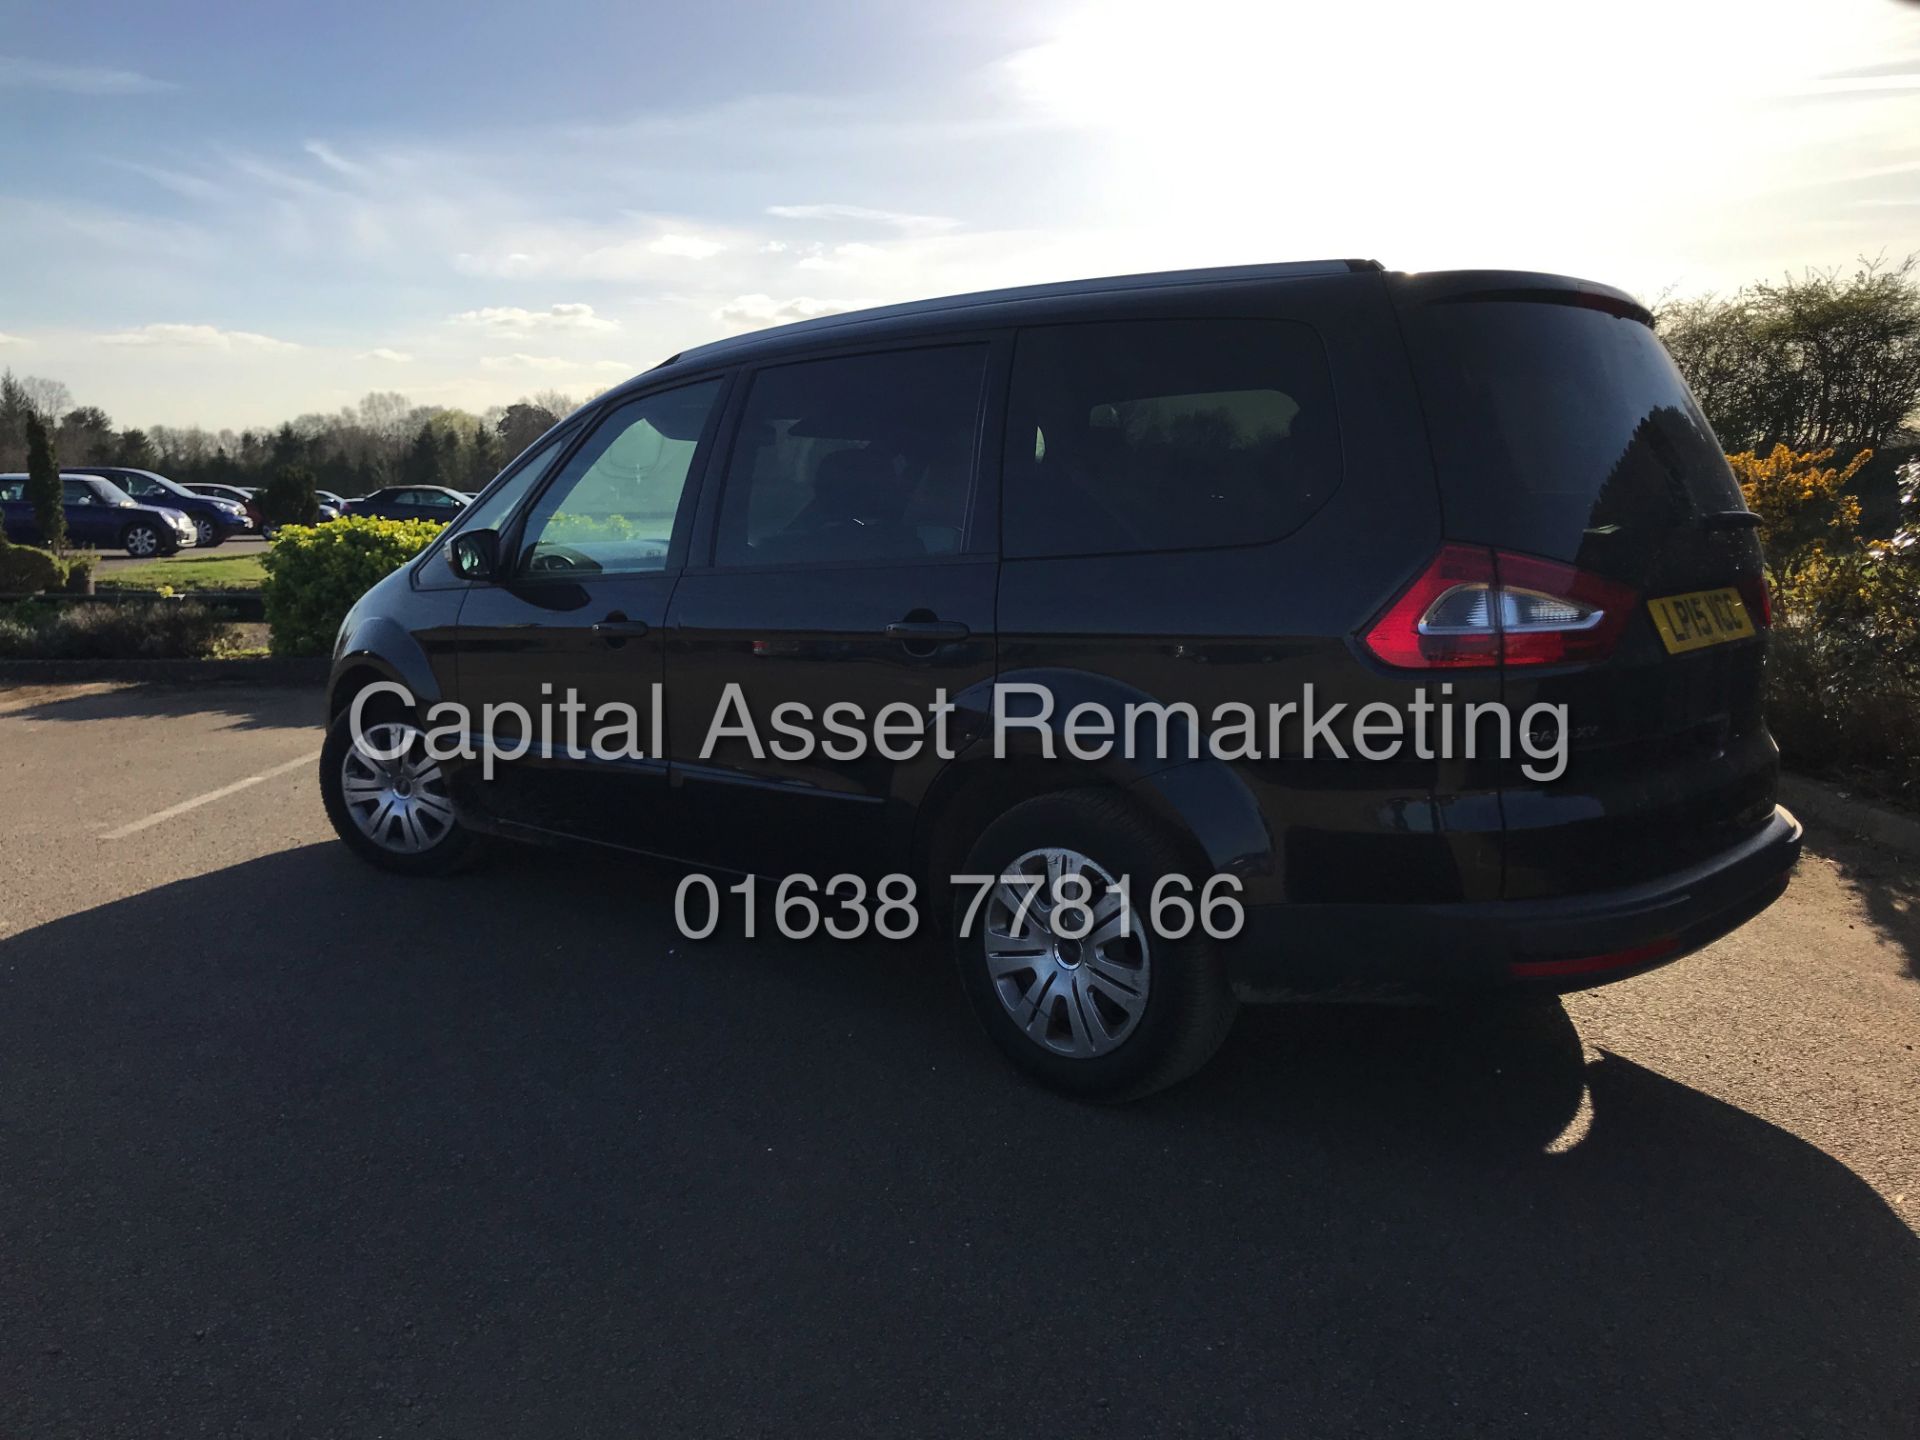 On Sale FORD GALAXY 2.0TDCI "POWER-SHIFT" 7 SEATER (15 REG) 1 OWNER - 140BHP - AIR CON - ELEC PACK - Image 3 of 20